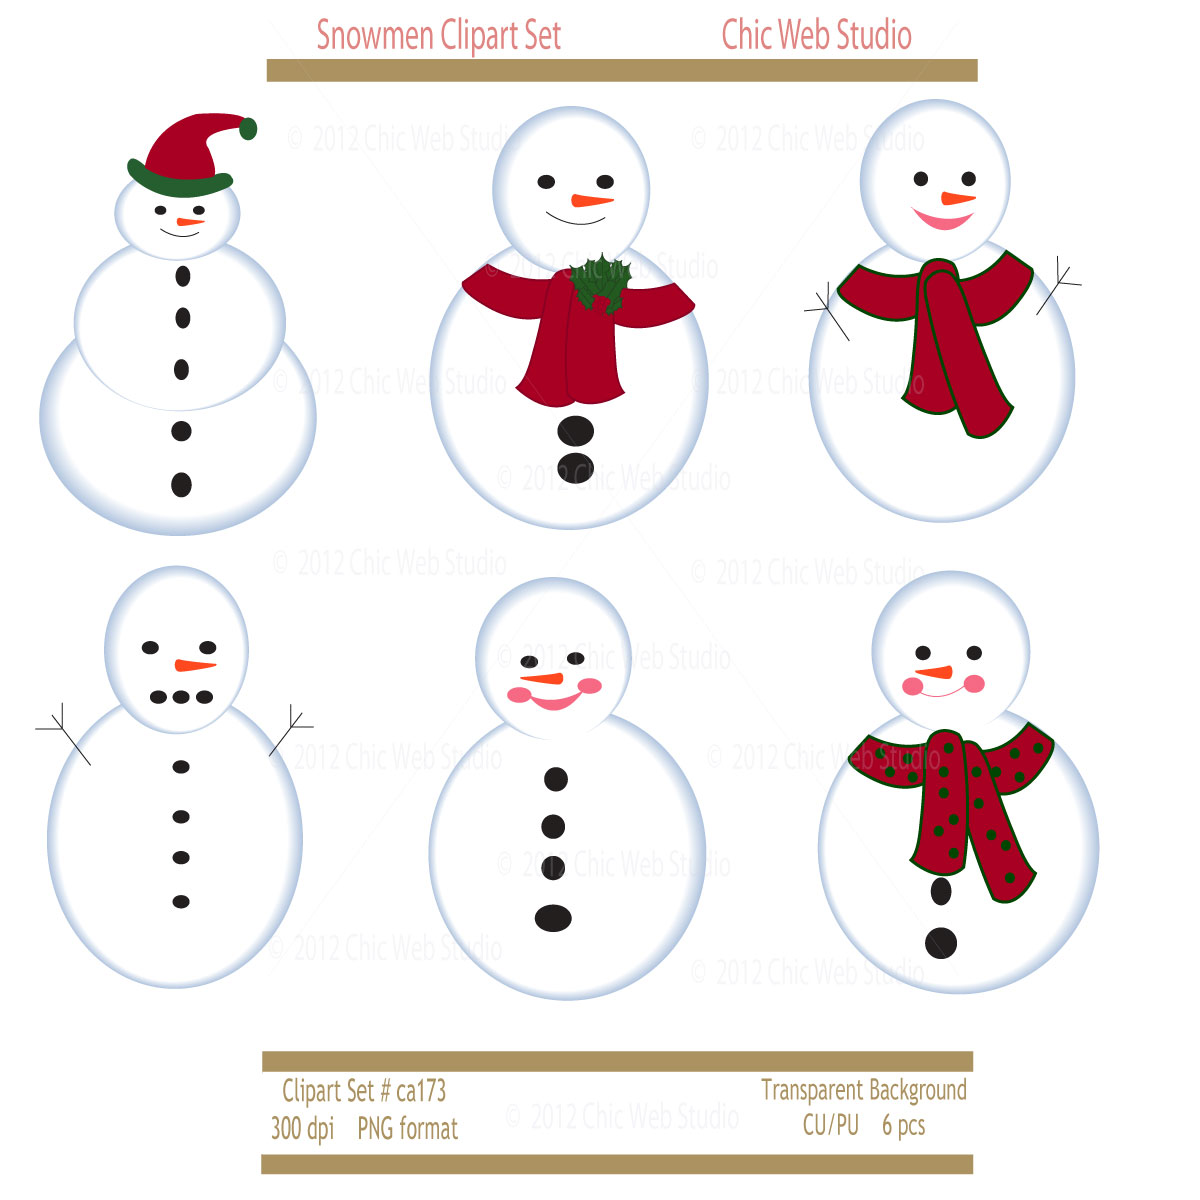 Just Listed A Set Of Snowmen Clipart In My Etsy Shop